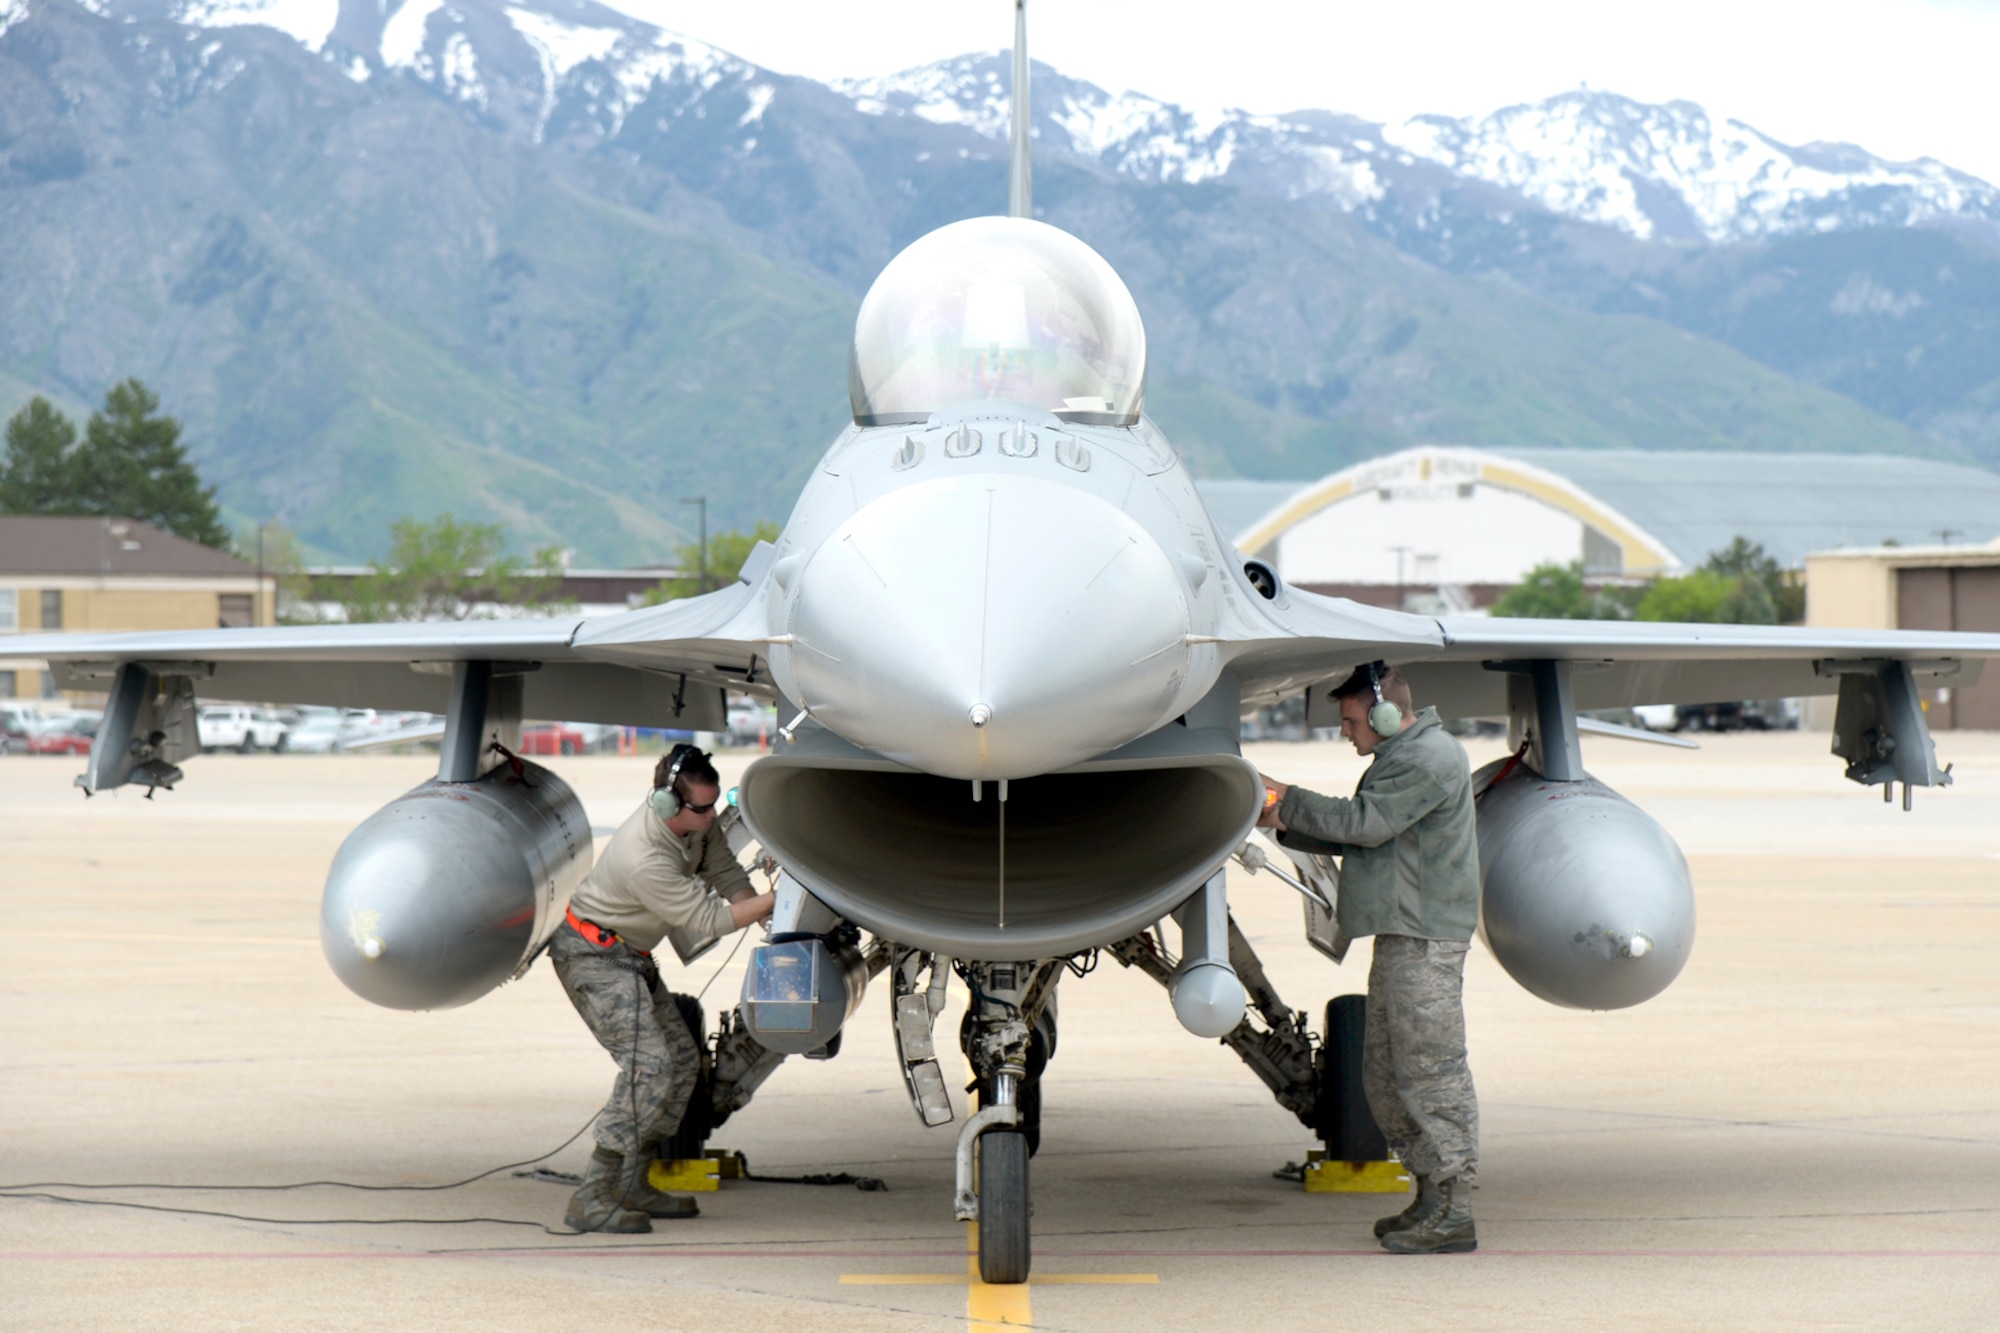 Staff Sgt. Jeremy Andrews and Staff Sgt. Brian Staller, both with 79th Tactical Fighter Squadron, provide recovery support for an F-16 from Shaw Air Force Base, South Carolina, after a training mission, May 10, 2018, at Hill Air Force Base, Utah. The unit participated in a Weapons System Evaluation Program, or WSEP, exercise conducted by the 86th Fighter Weapons Squadron, a Hill tenant unit. (U.S. Air Force photo by Todd Cromar)